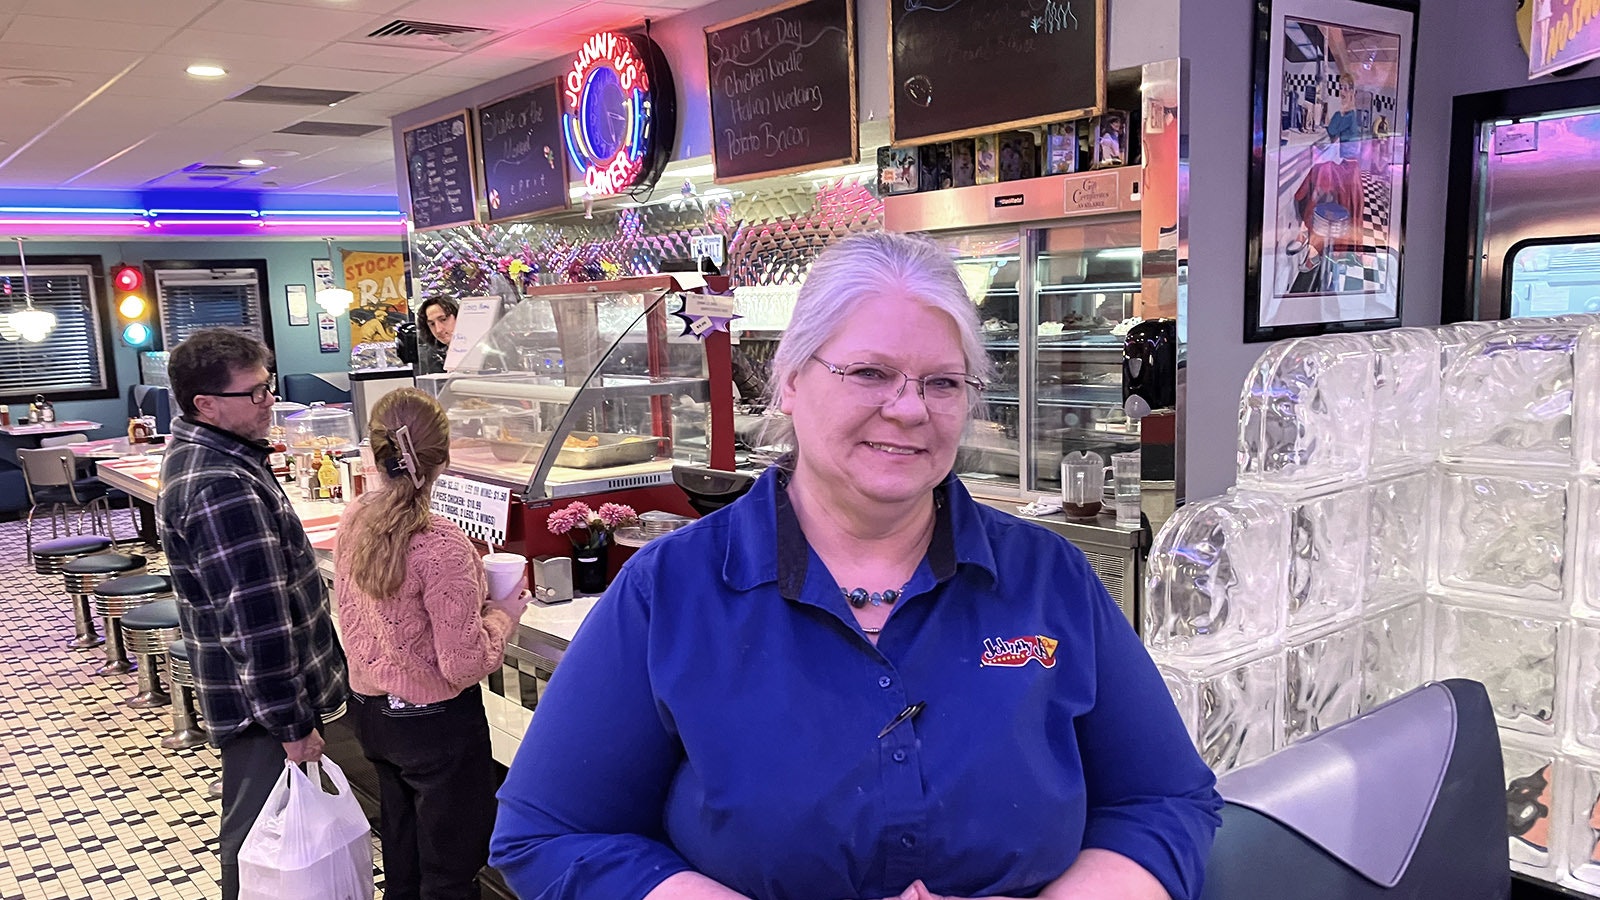 Johnny J’s Diner owner Pat White said the opportunity to own and run a restaurant is a “dream” she has had since 12 years old.